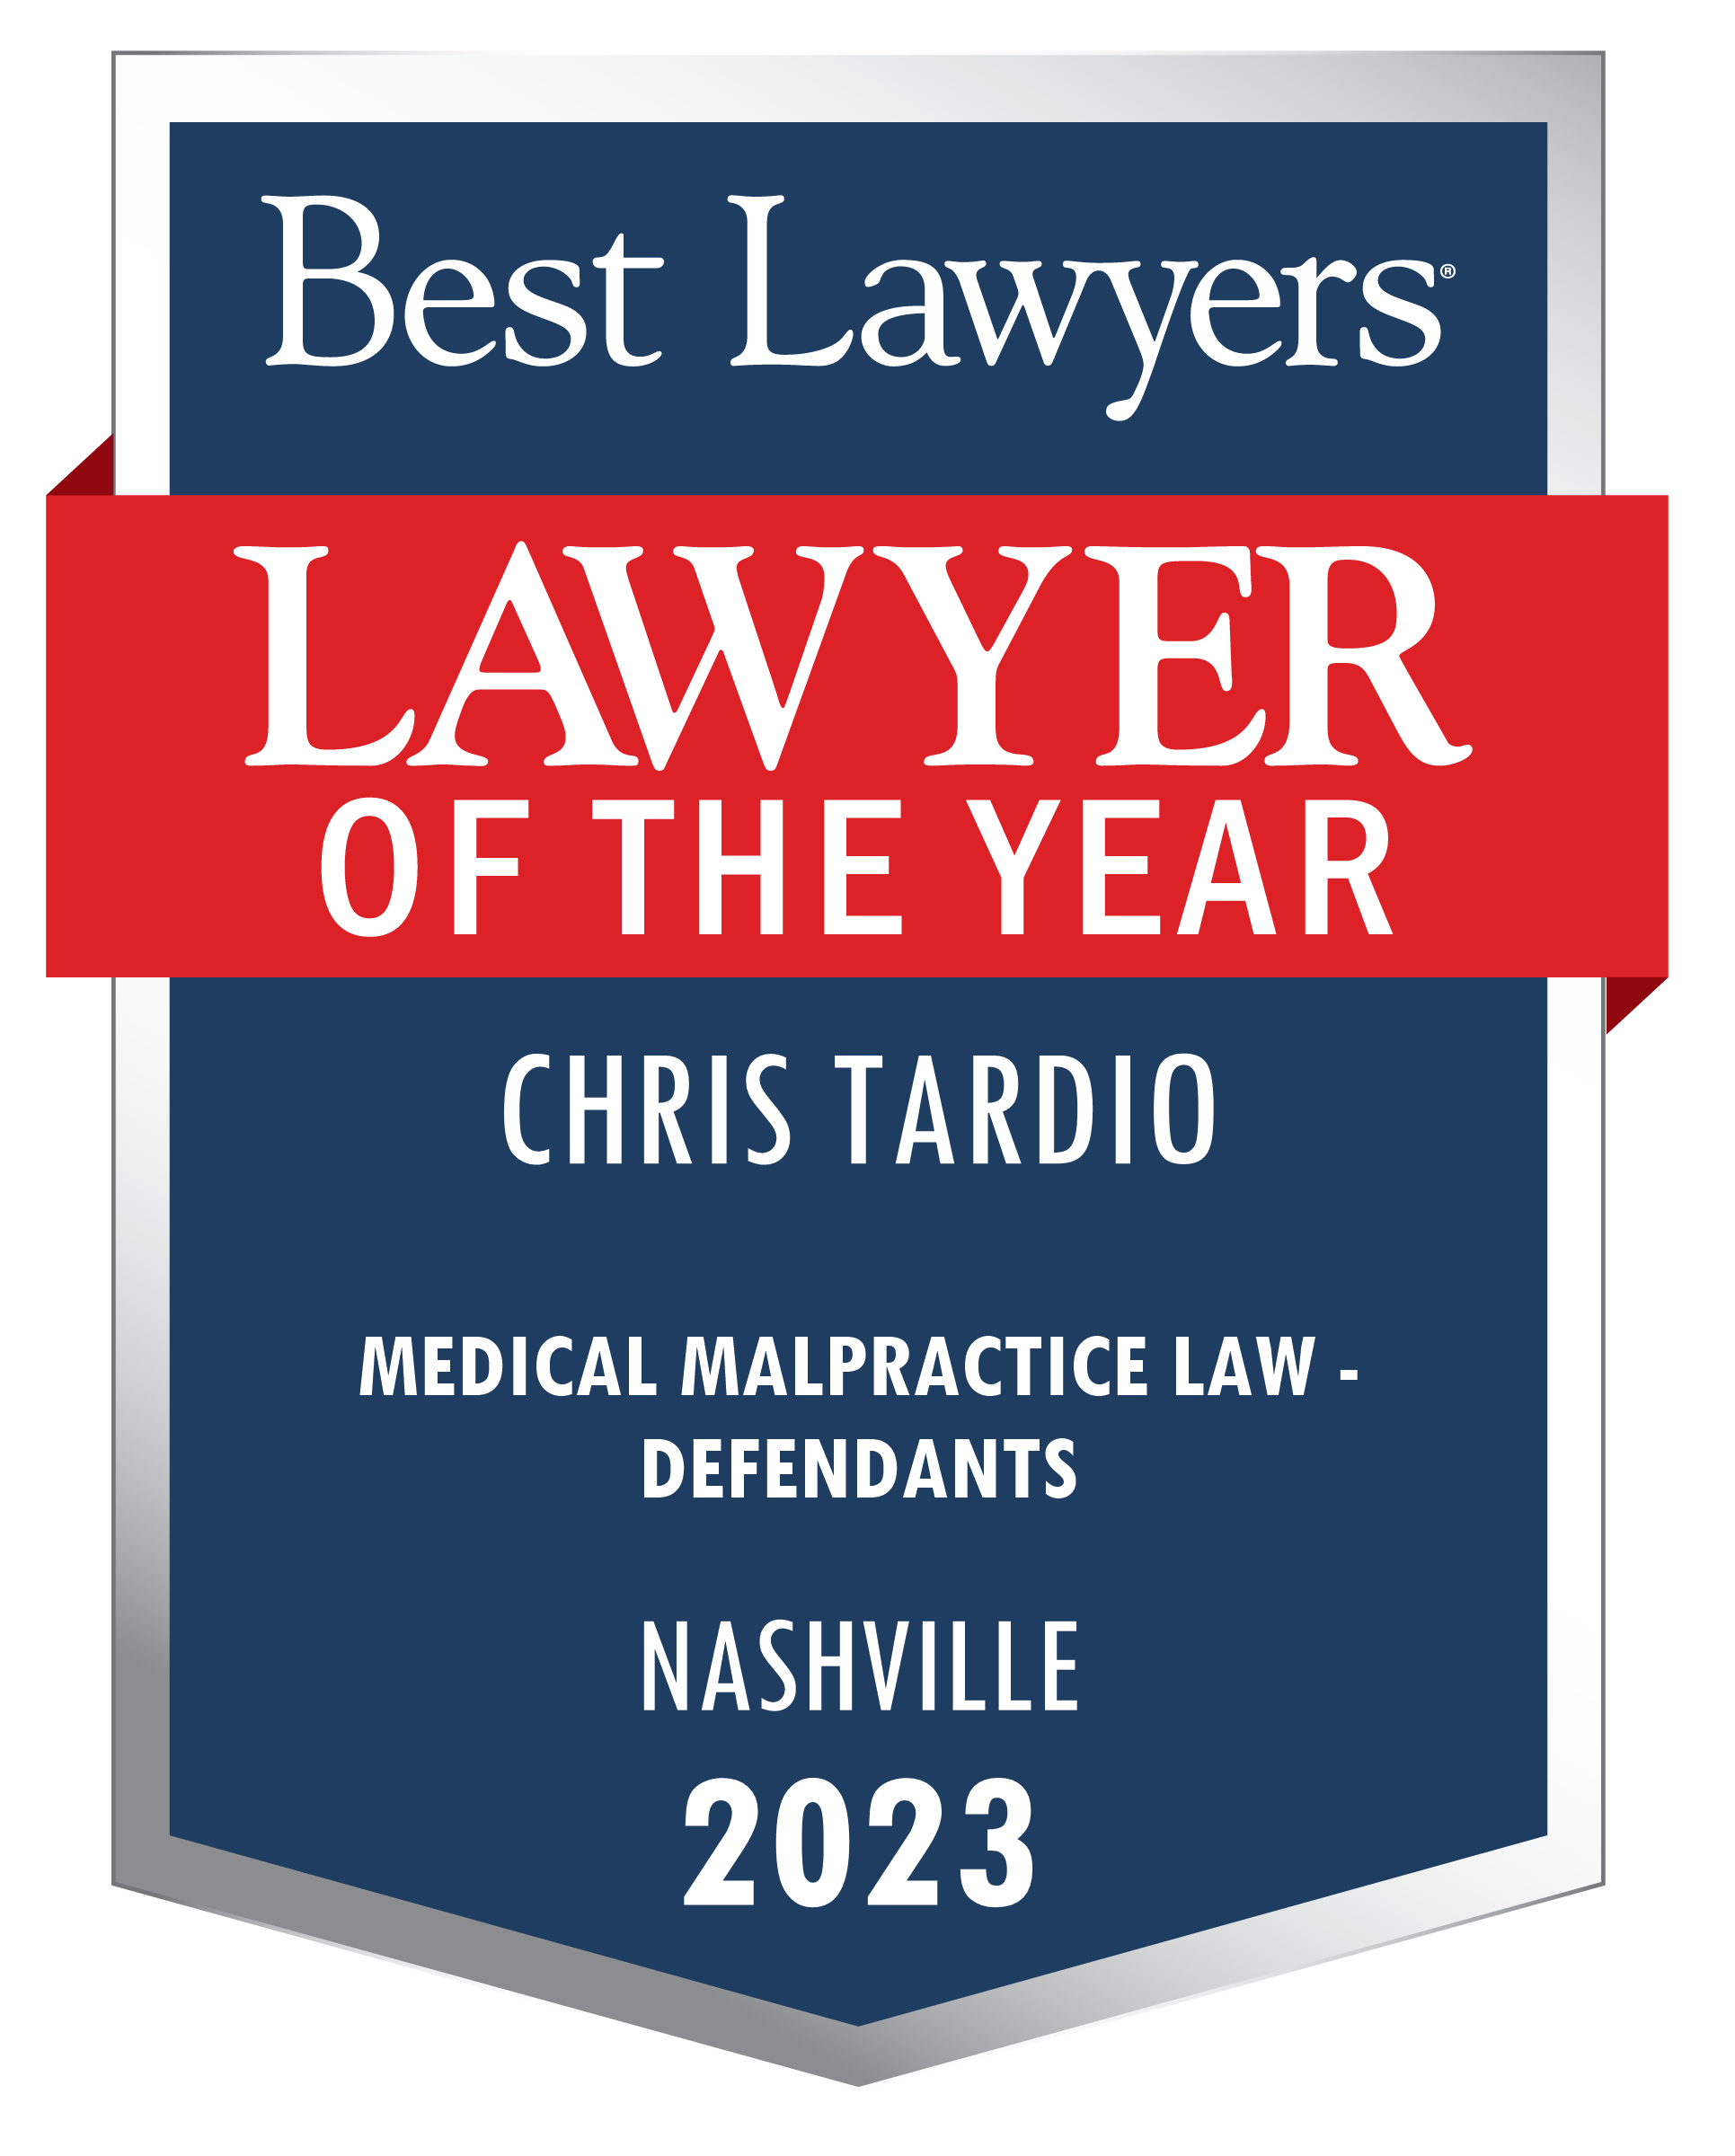 Best Lawyers - "Lawyer of the Year" Contemporary Logo